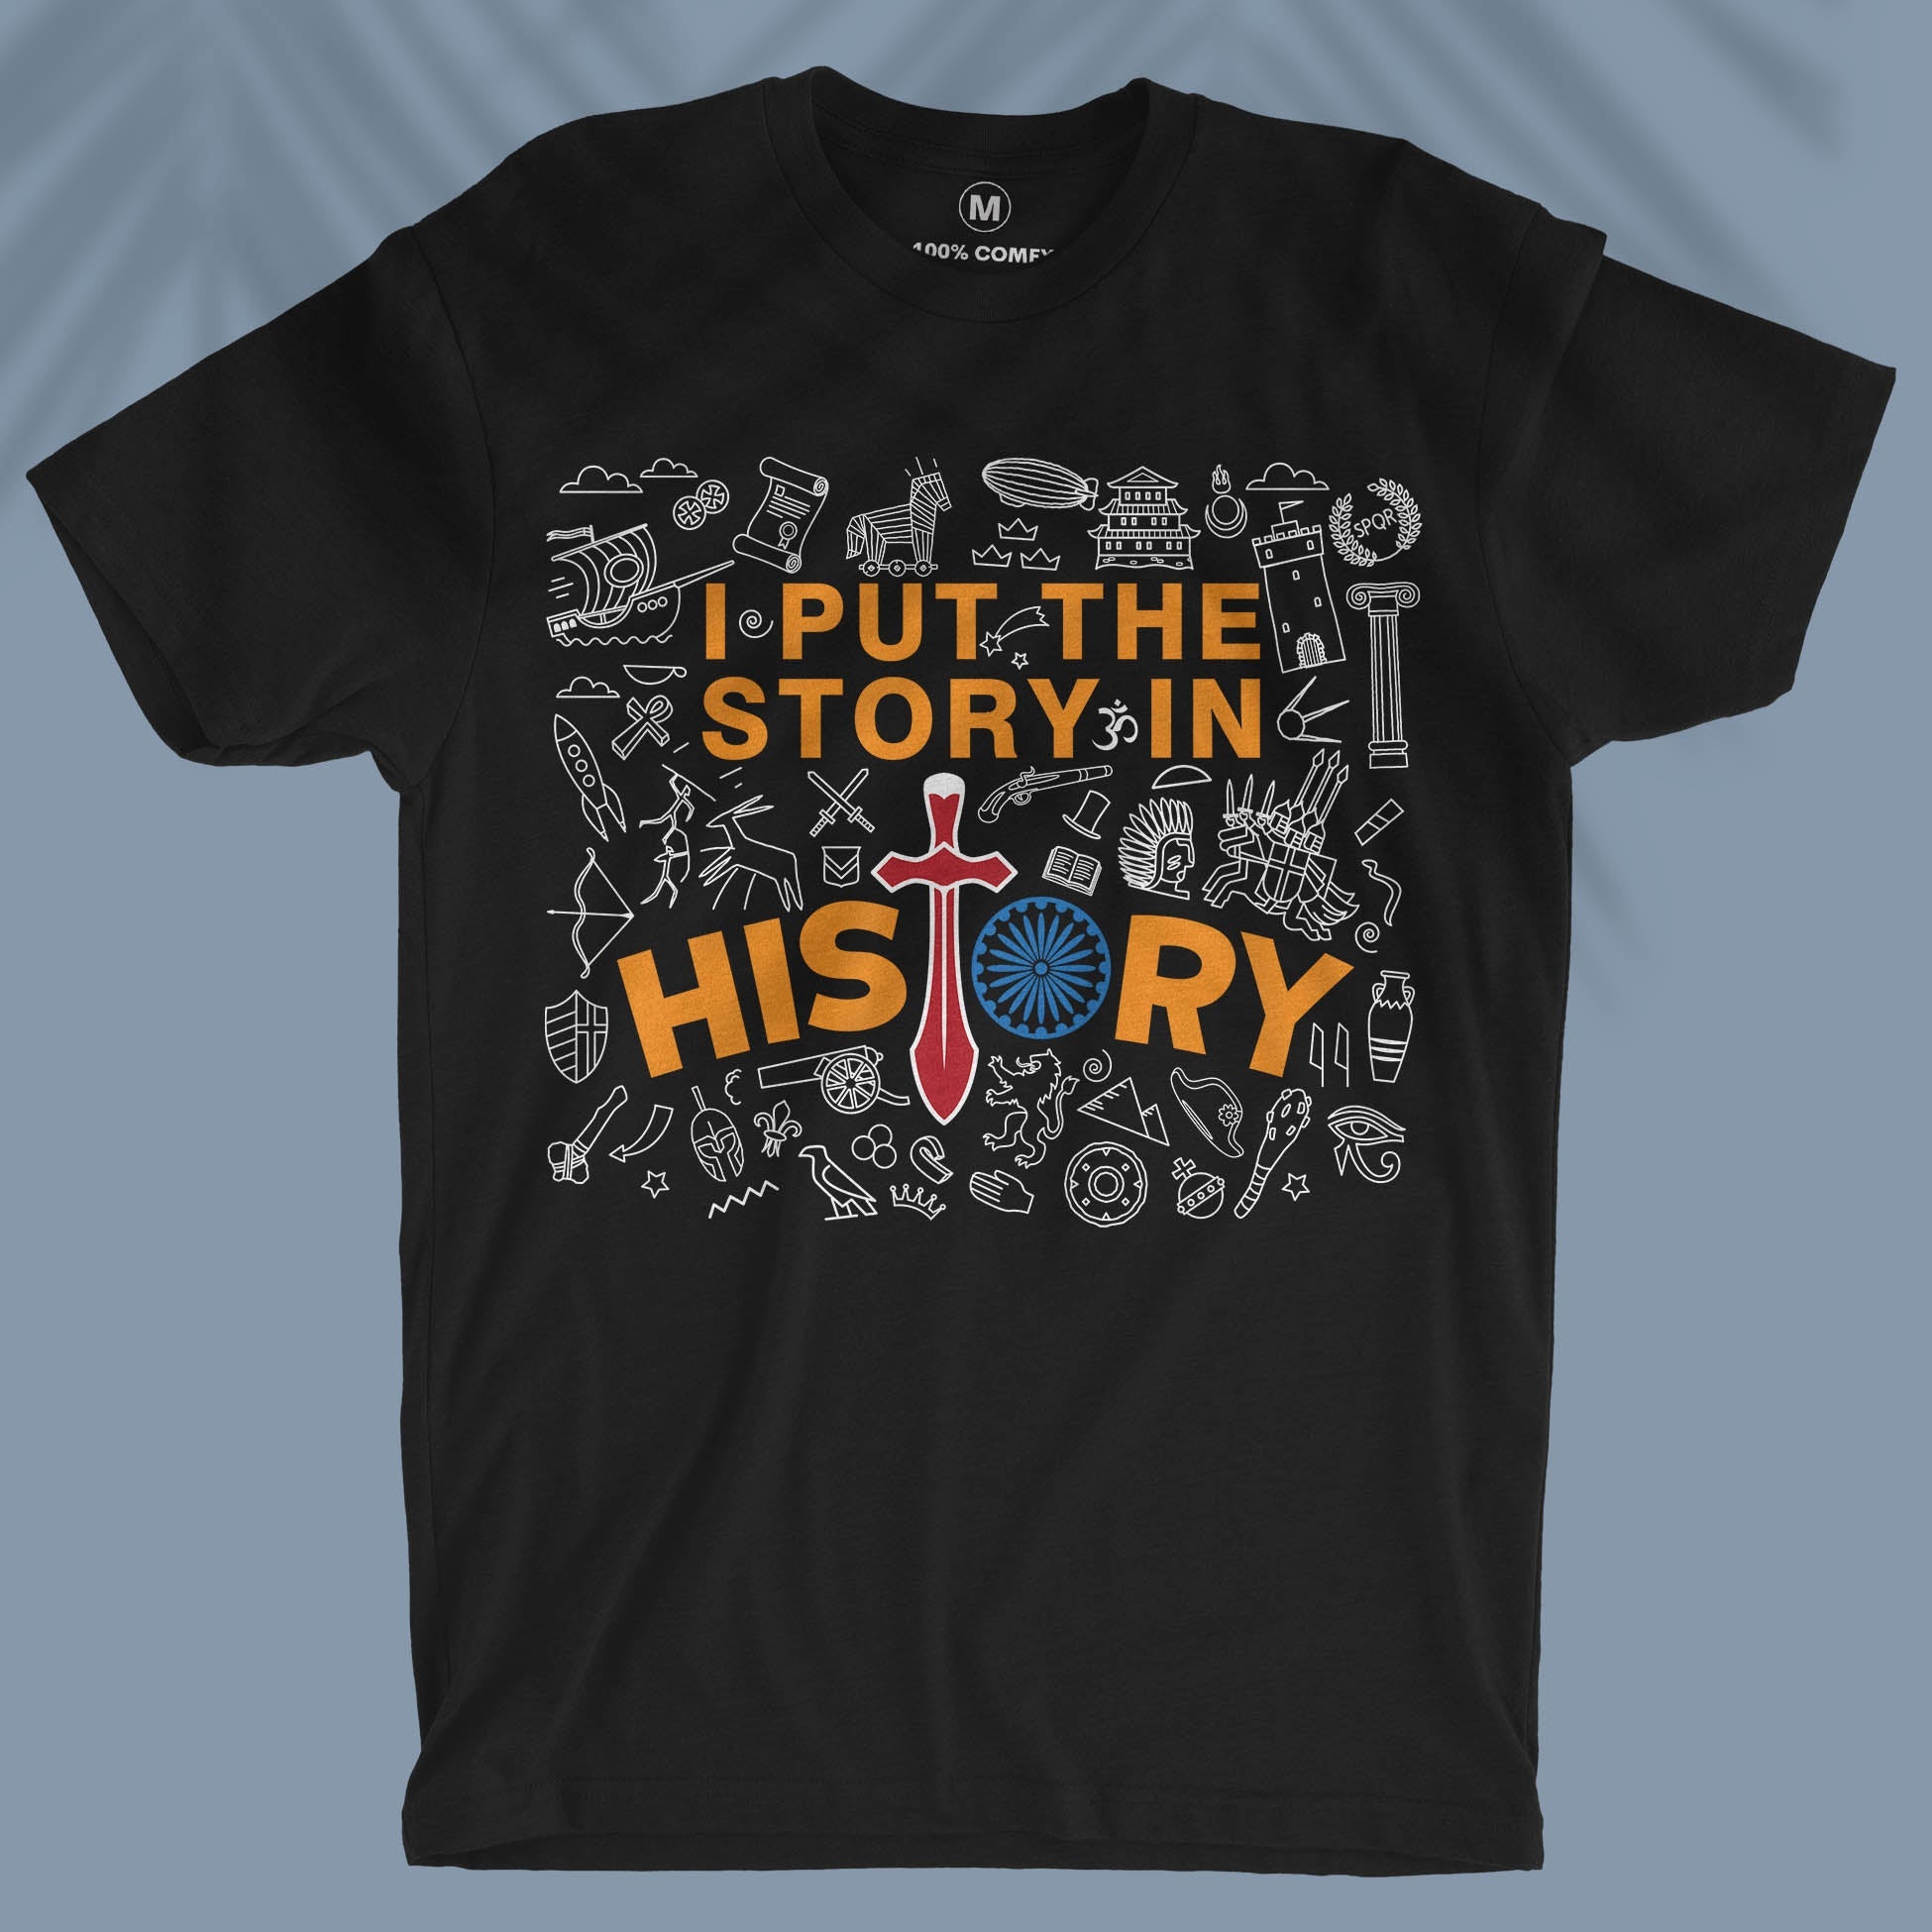 I Put The Story In History  - Unisex T-shirt For History Teachers And Learners